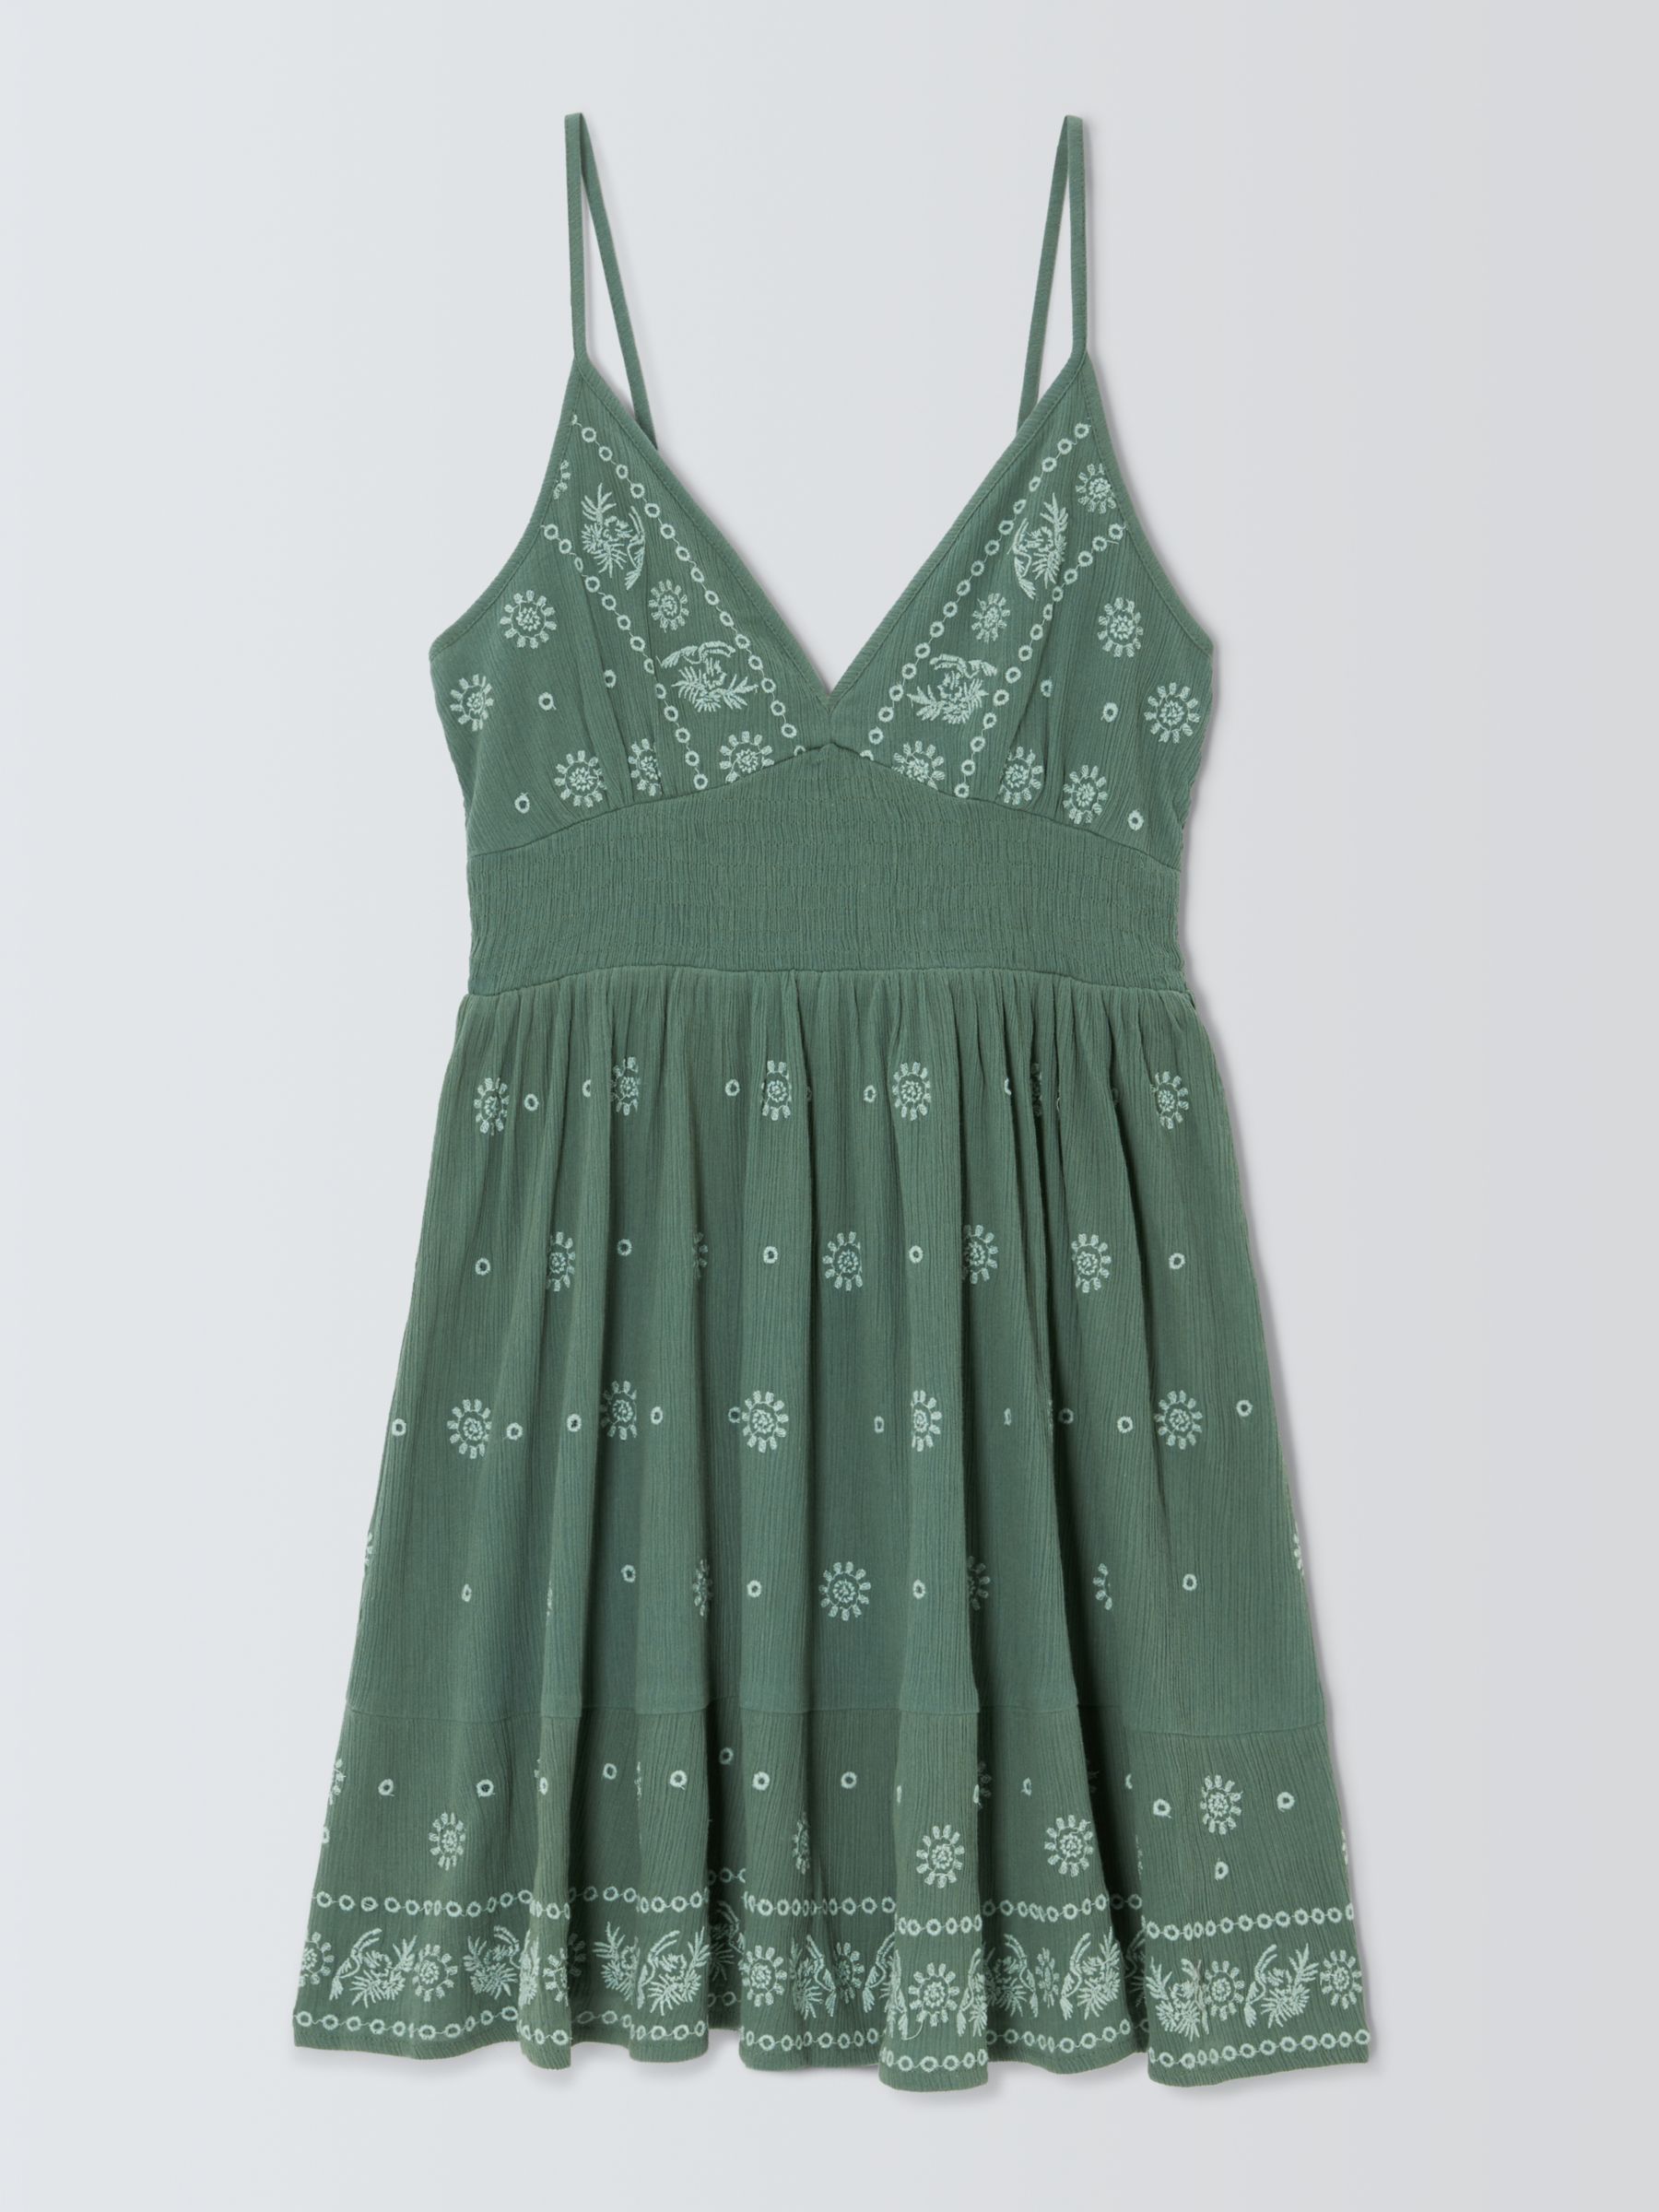 AND/OR Tropics Embroidered Mini Beach Dress, Green, S